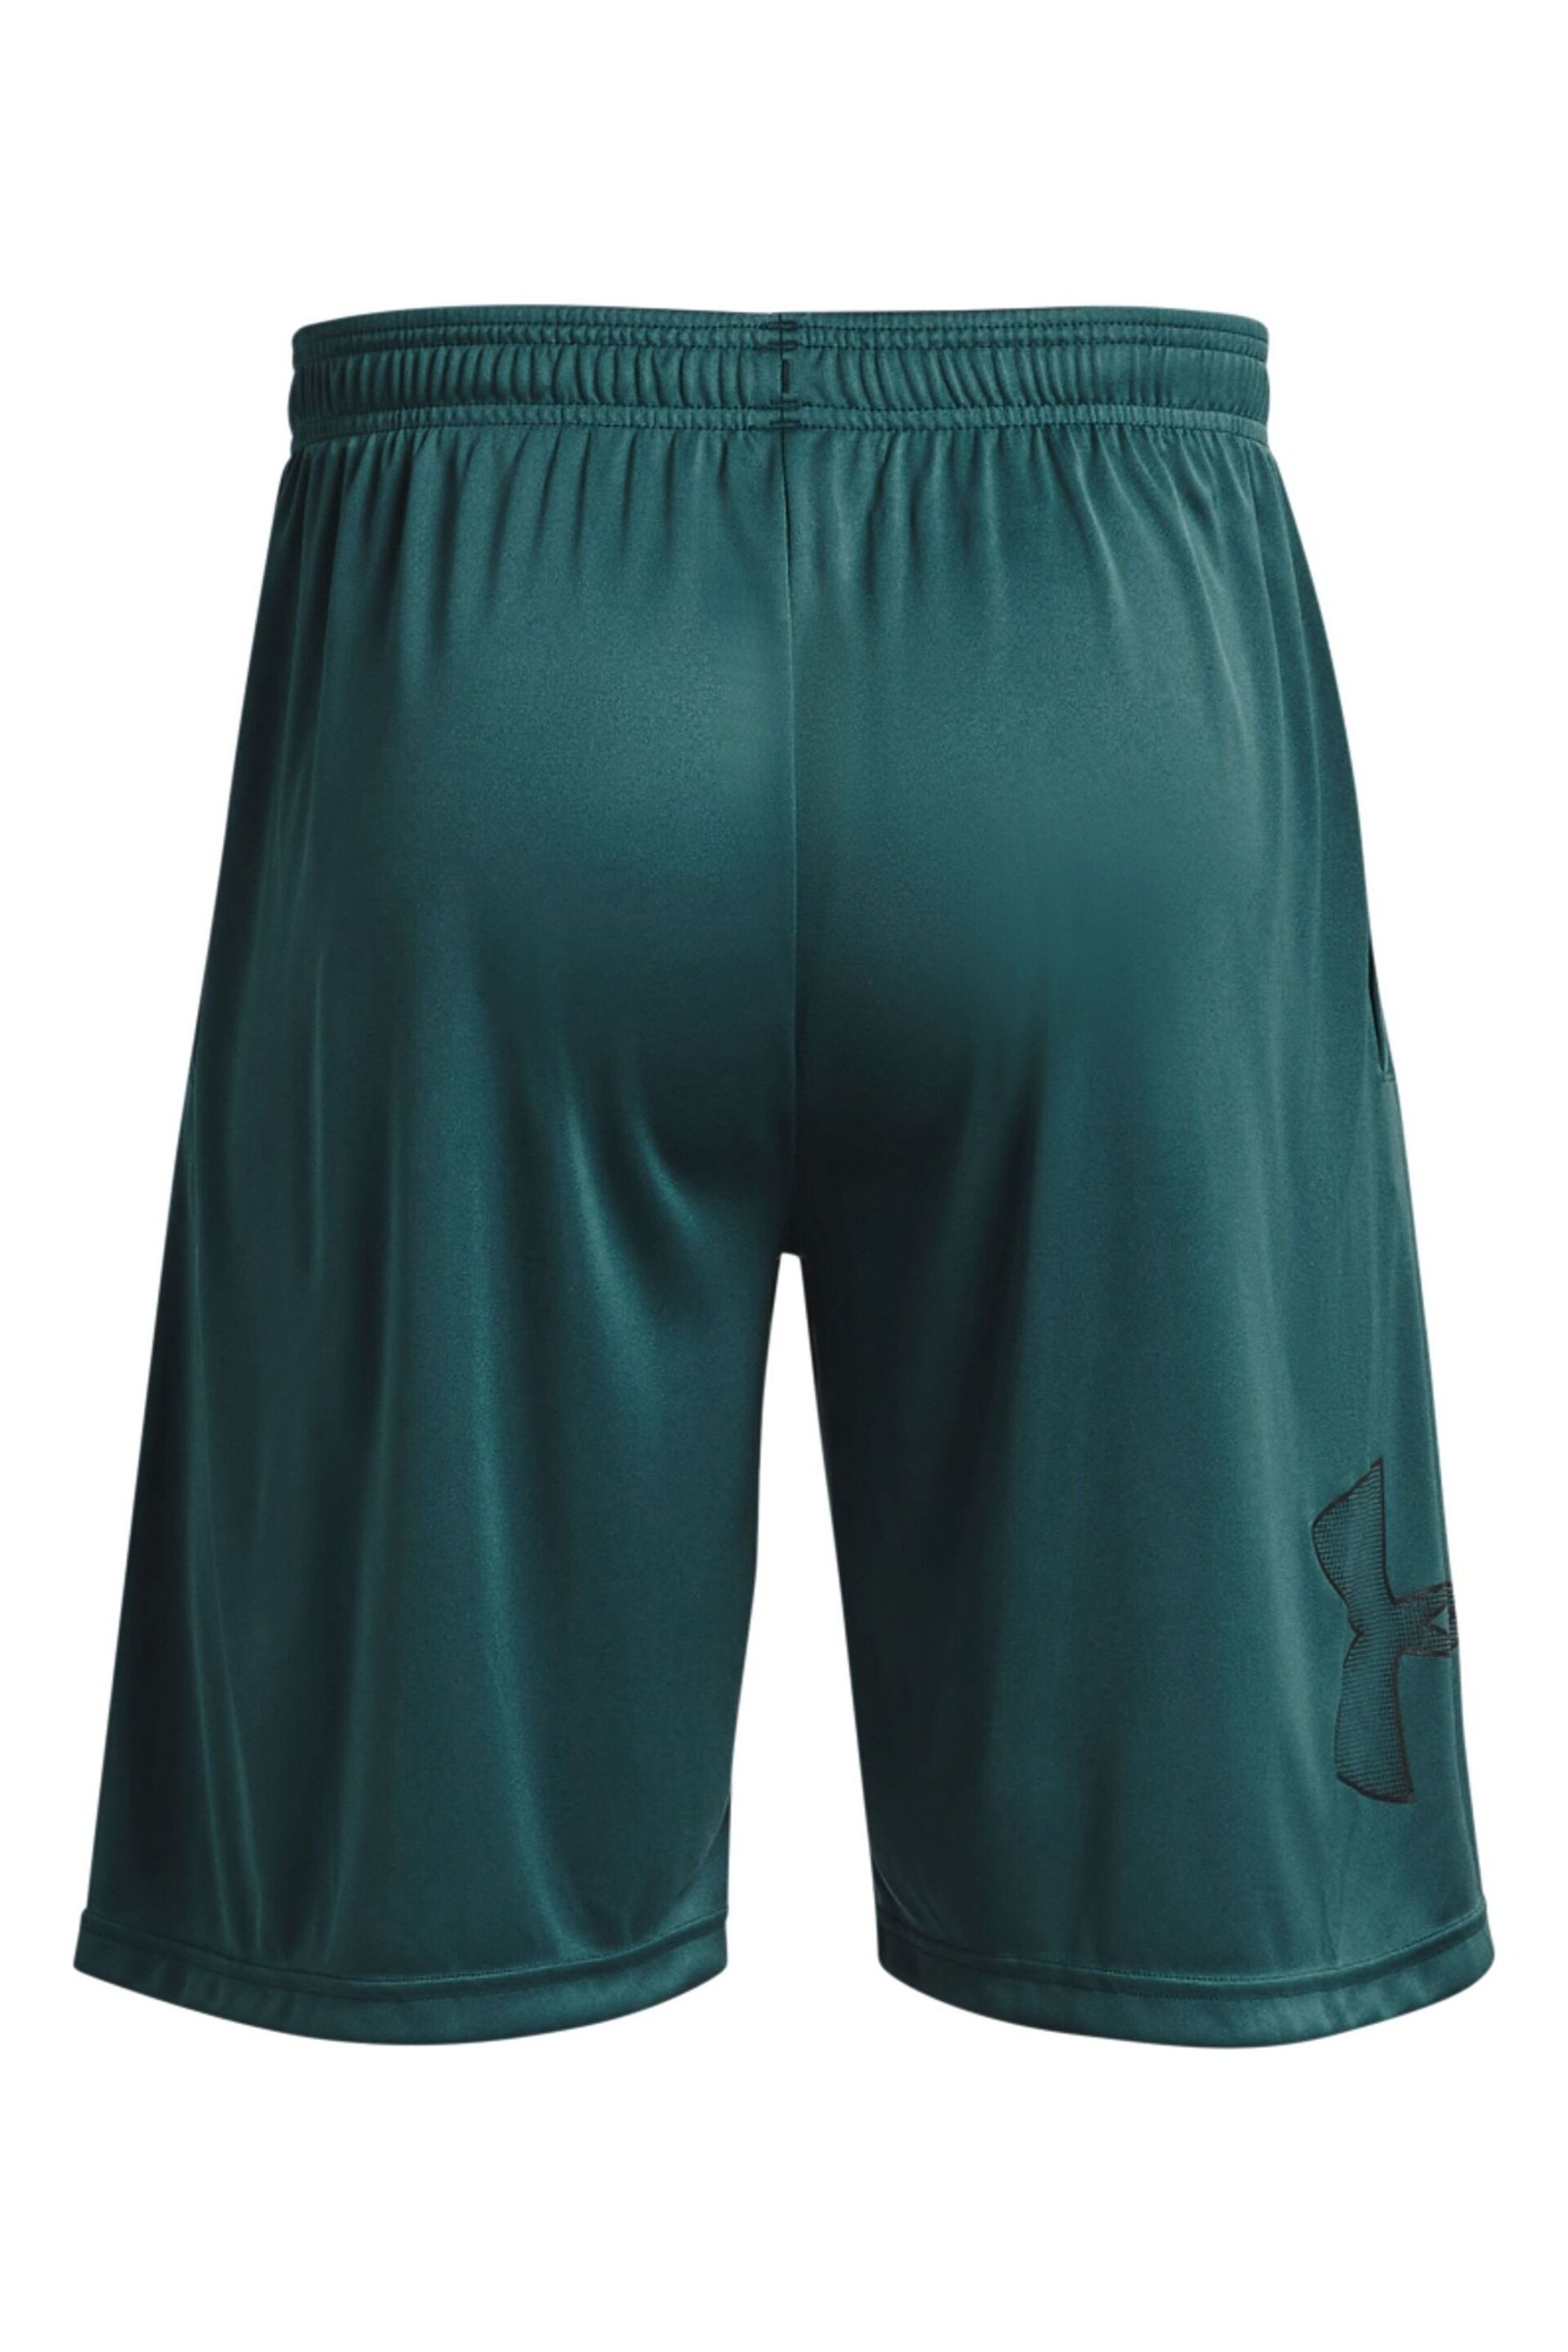 Under Armour Tech Graphic Shorts - Image 2 of 4